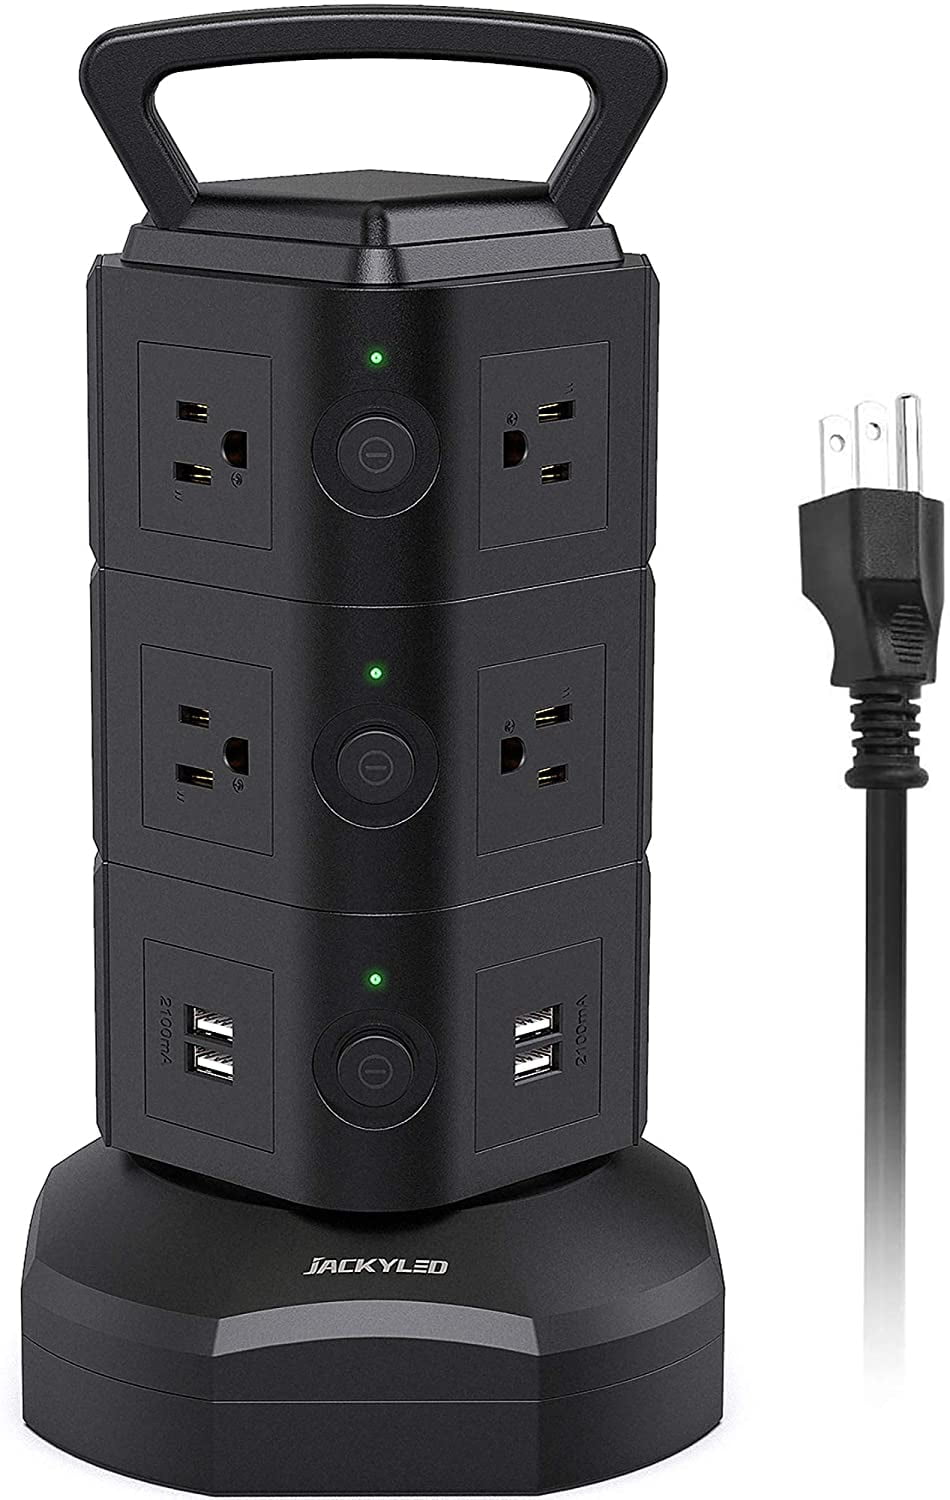 Black and White Power Bar Surge Protector Power Strip 10-Outlet with 4-USB Multiple Outlets Tower Socket 6.5ft Long Cord 3 Prong Plug Universal Charging Station for Office by Safemore